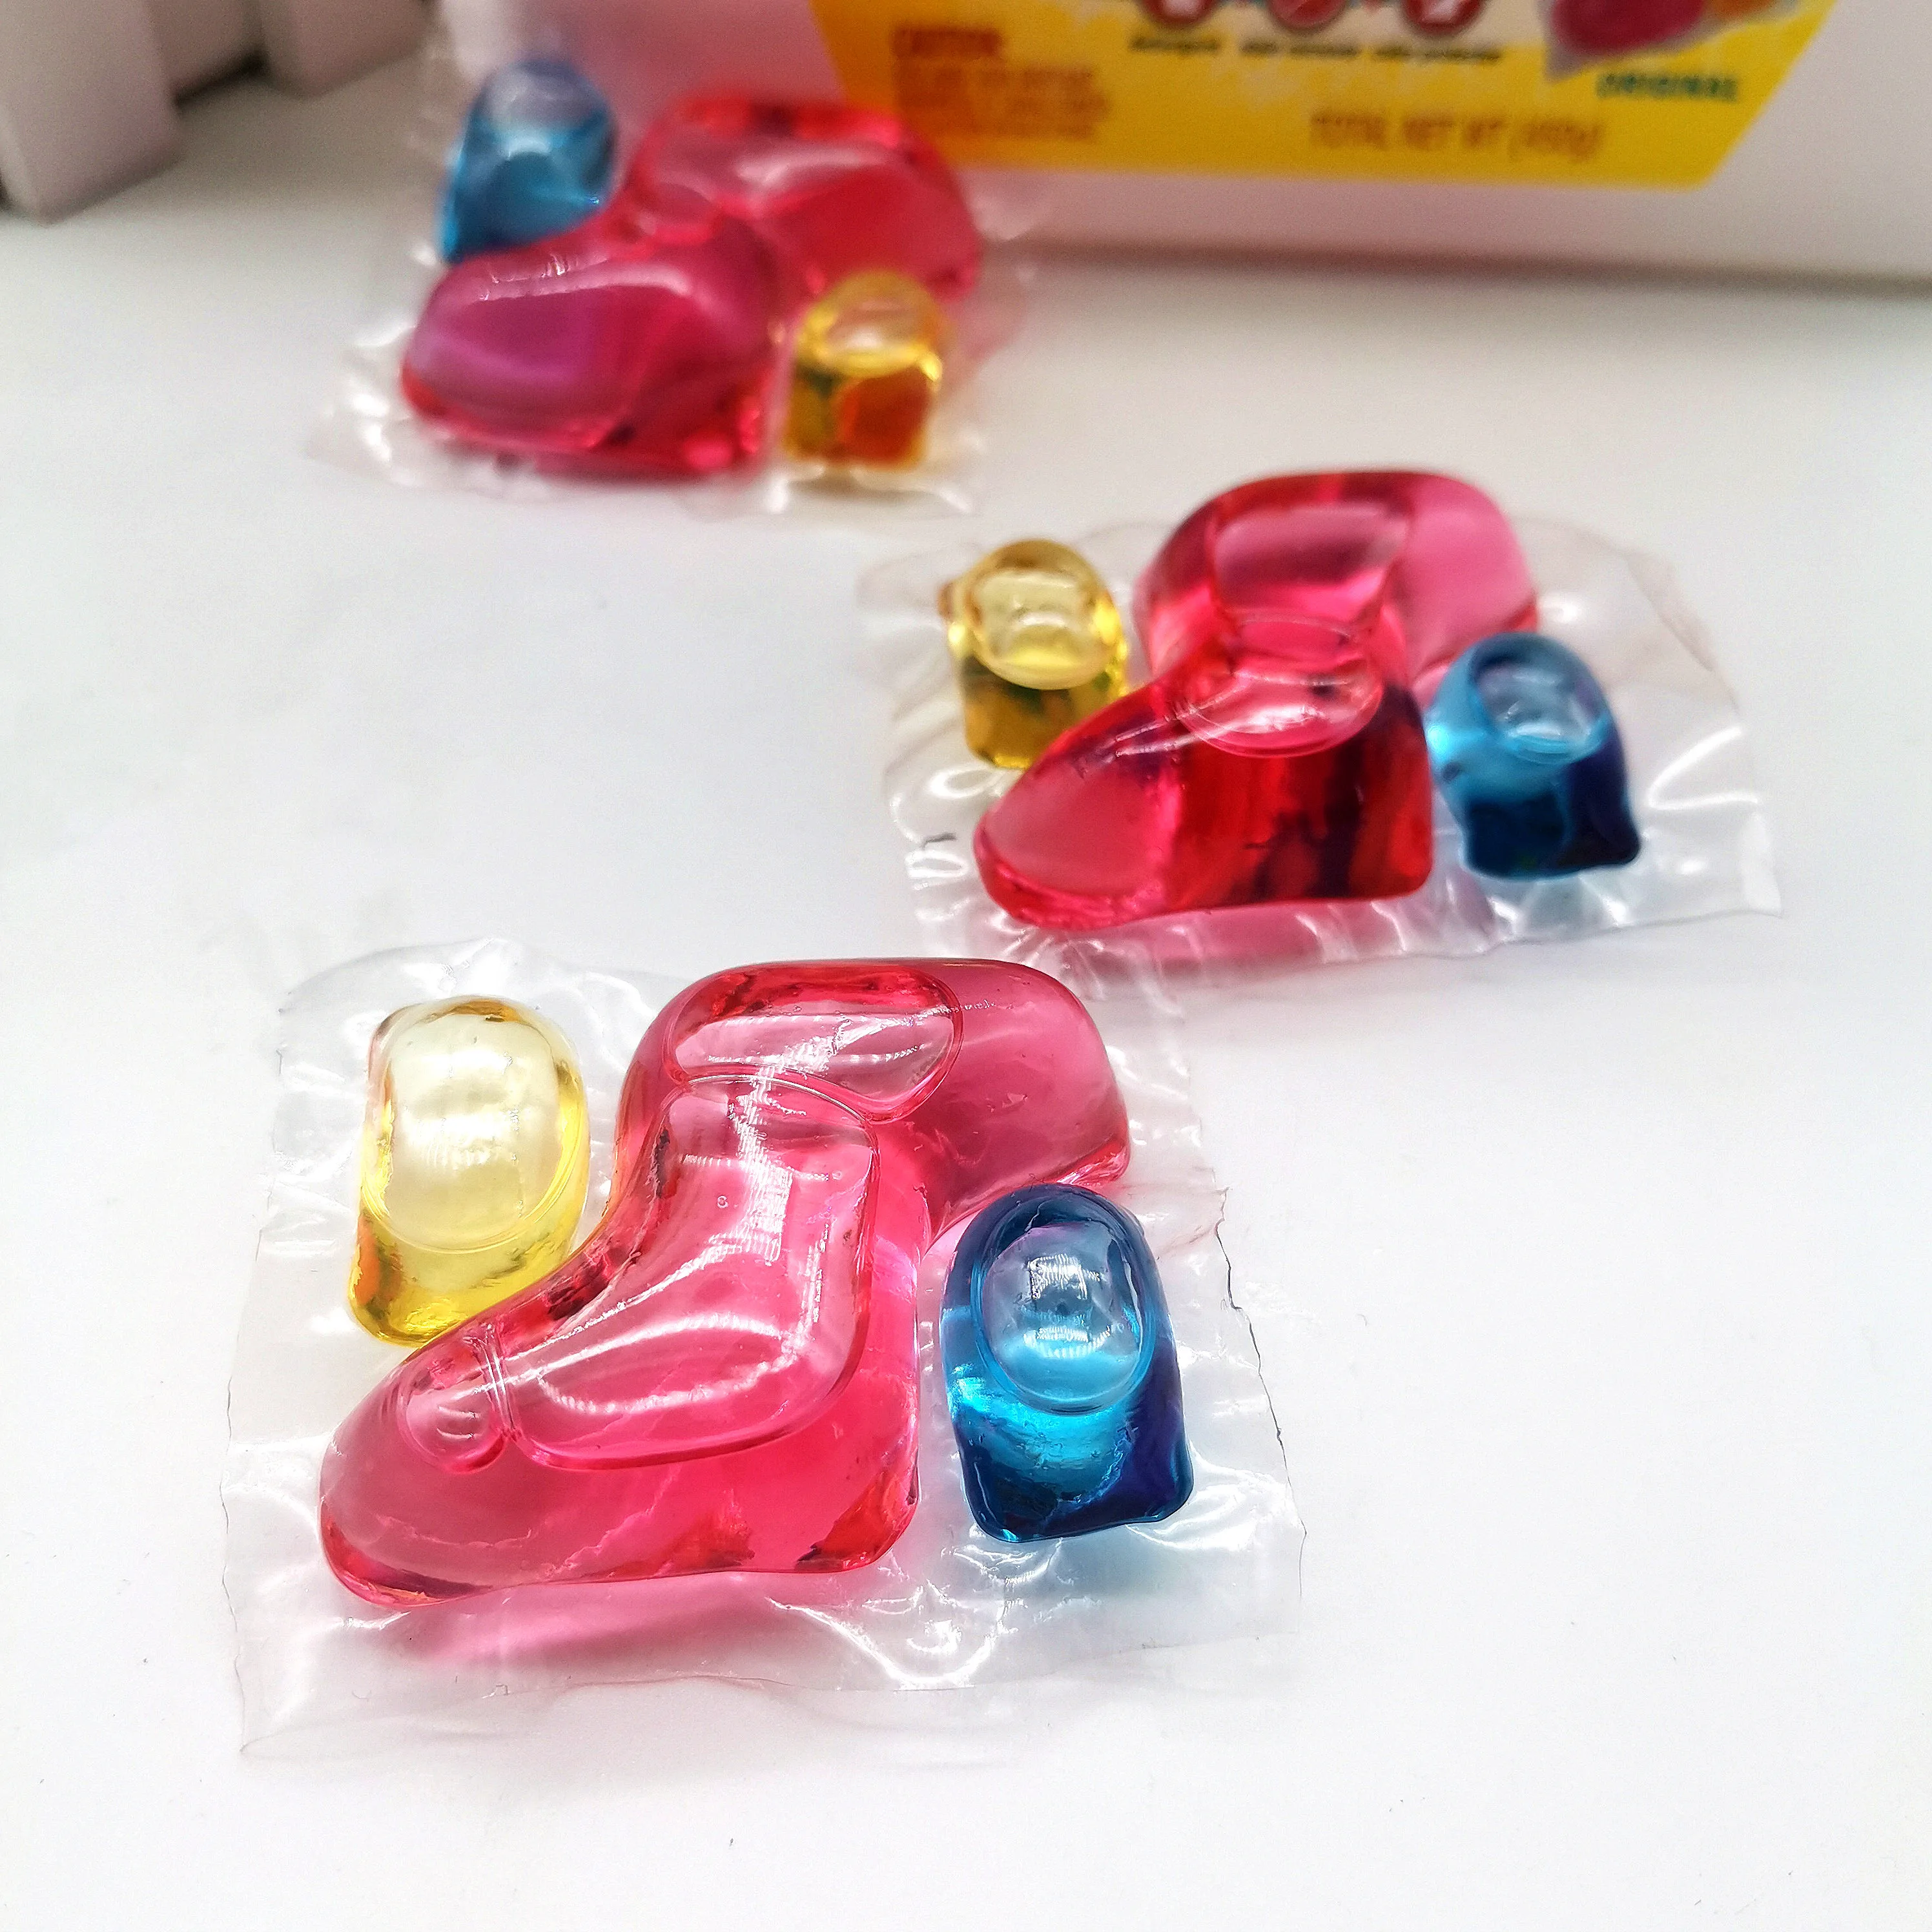 

OEM 3in1 Clothes Washing Apparel Detergent Pods Liquid Laundry Soap Capsules